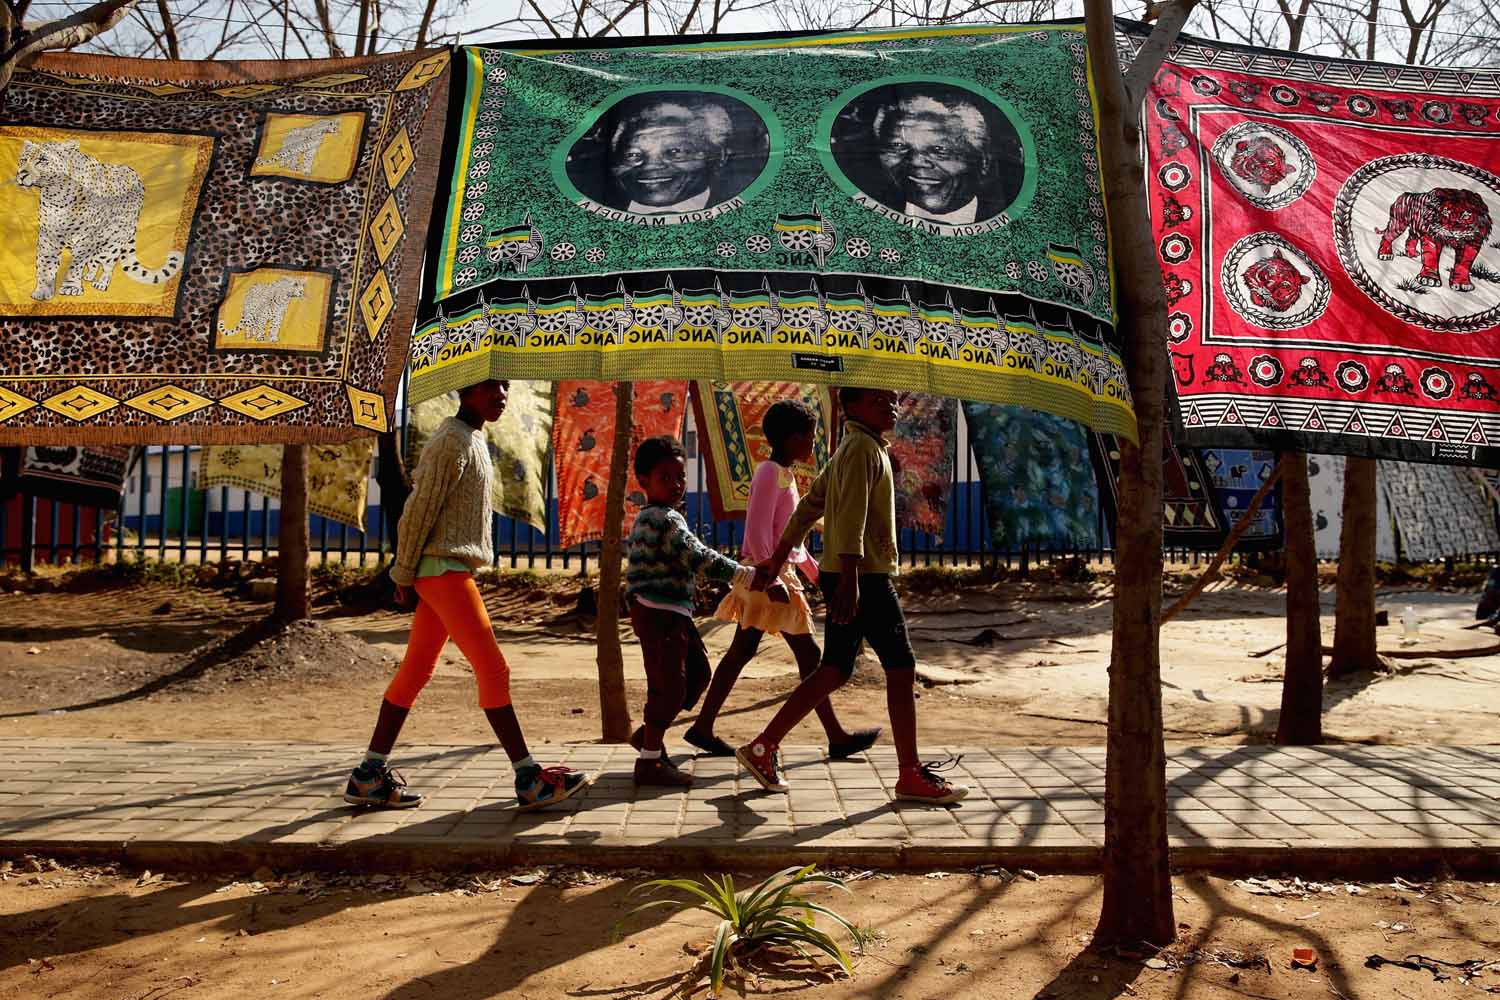 June 24, 2013. Children walk past souvenir flags picturing former South African President Nelson Mandela being sold across from the Hector Pieterson Memorial and Museum in Soweto Township in Johannesburg, South Africa.